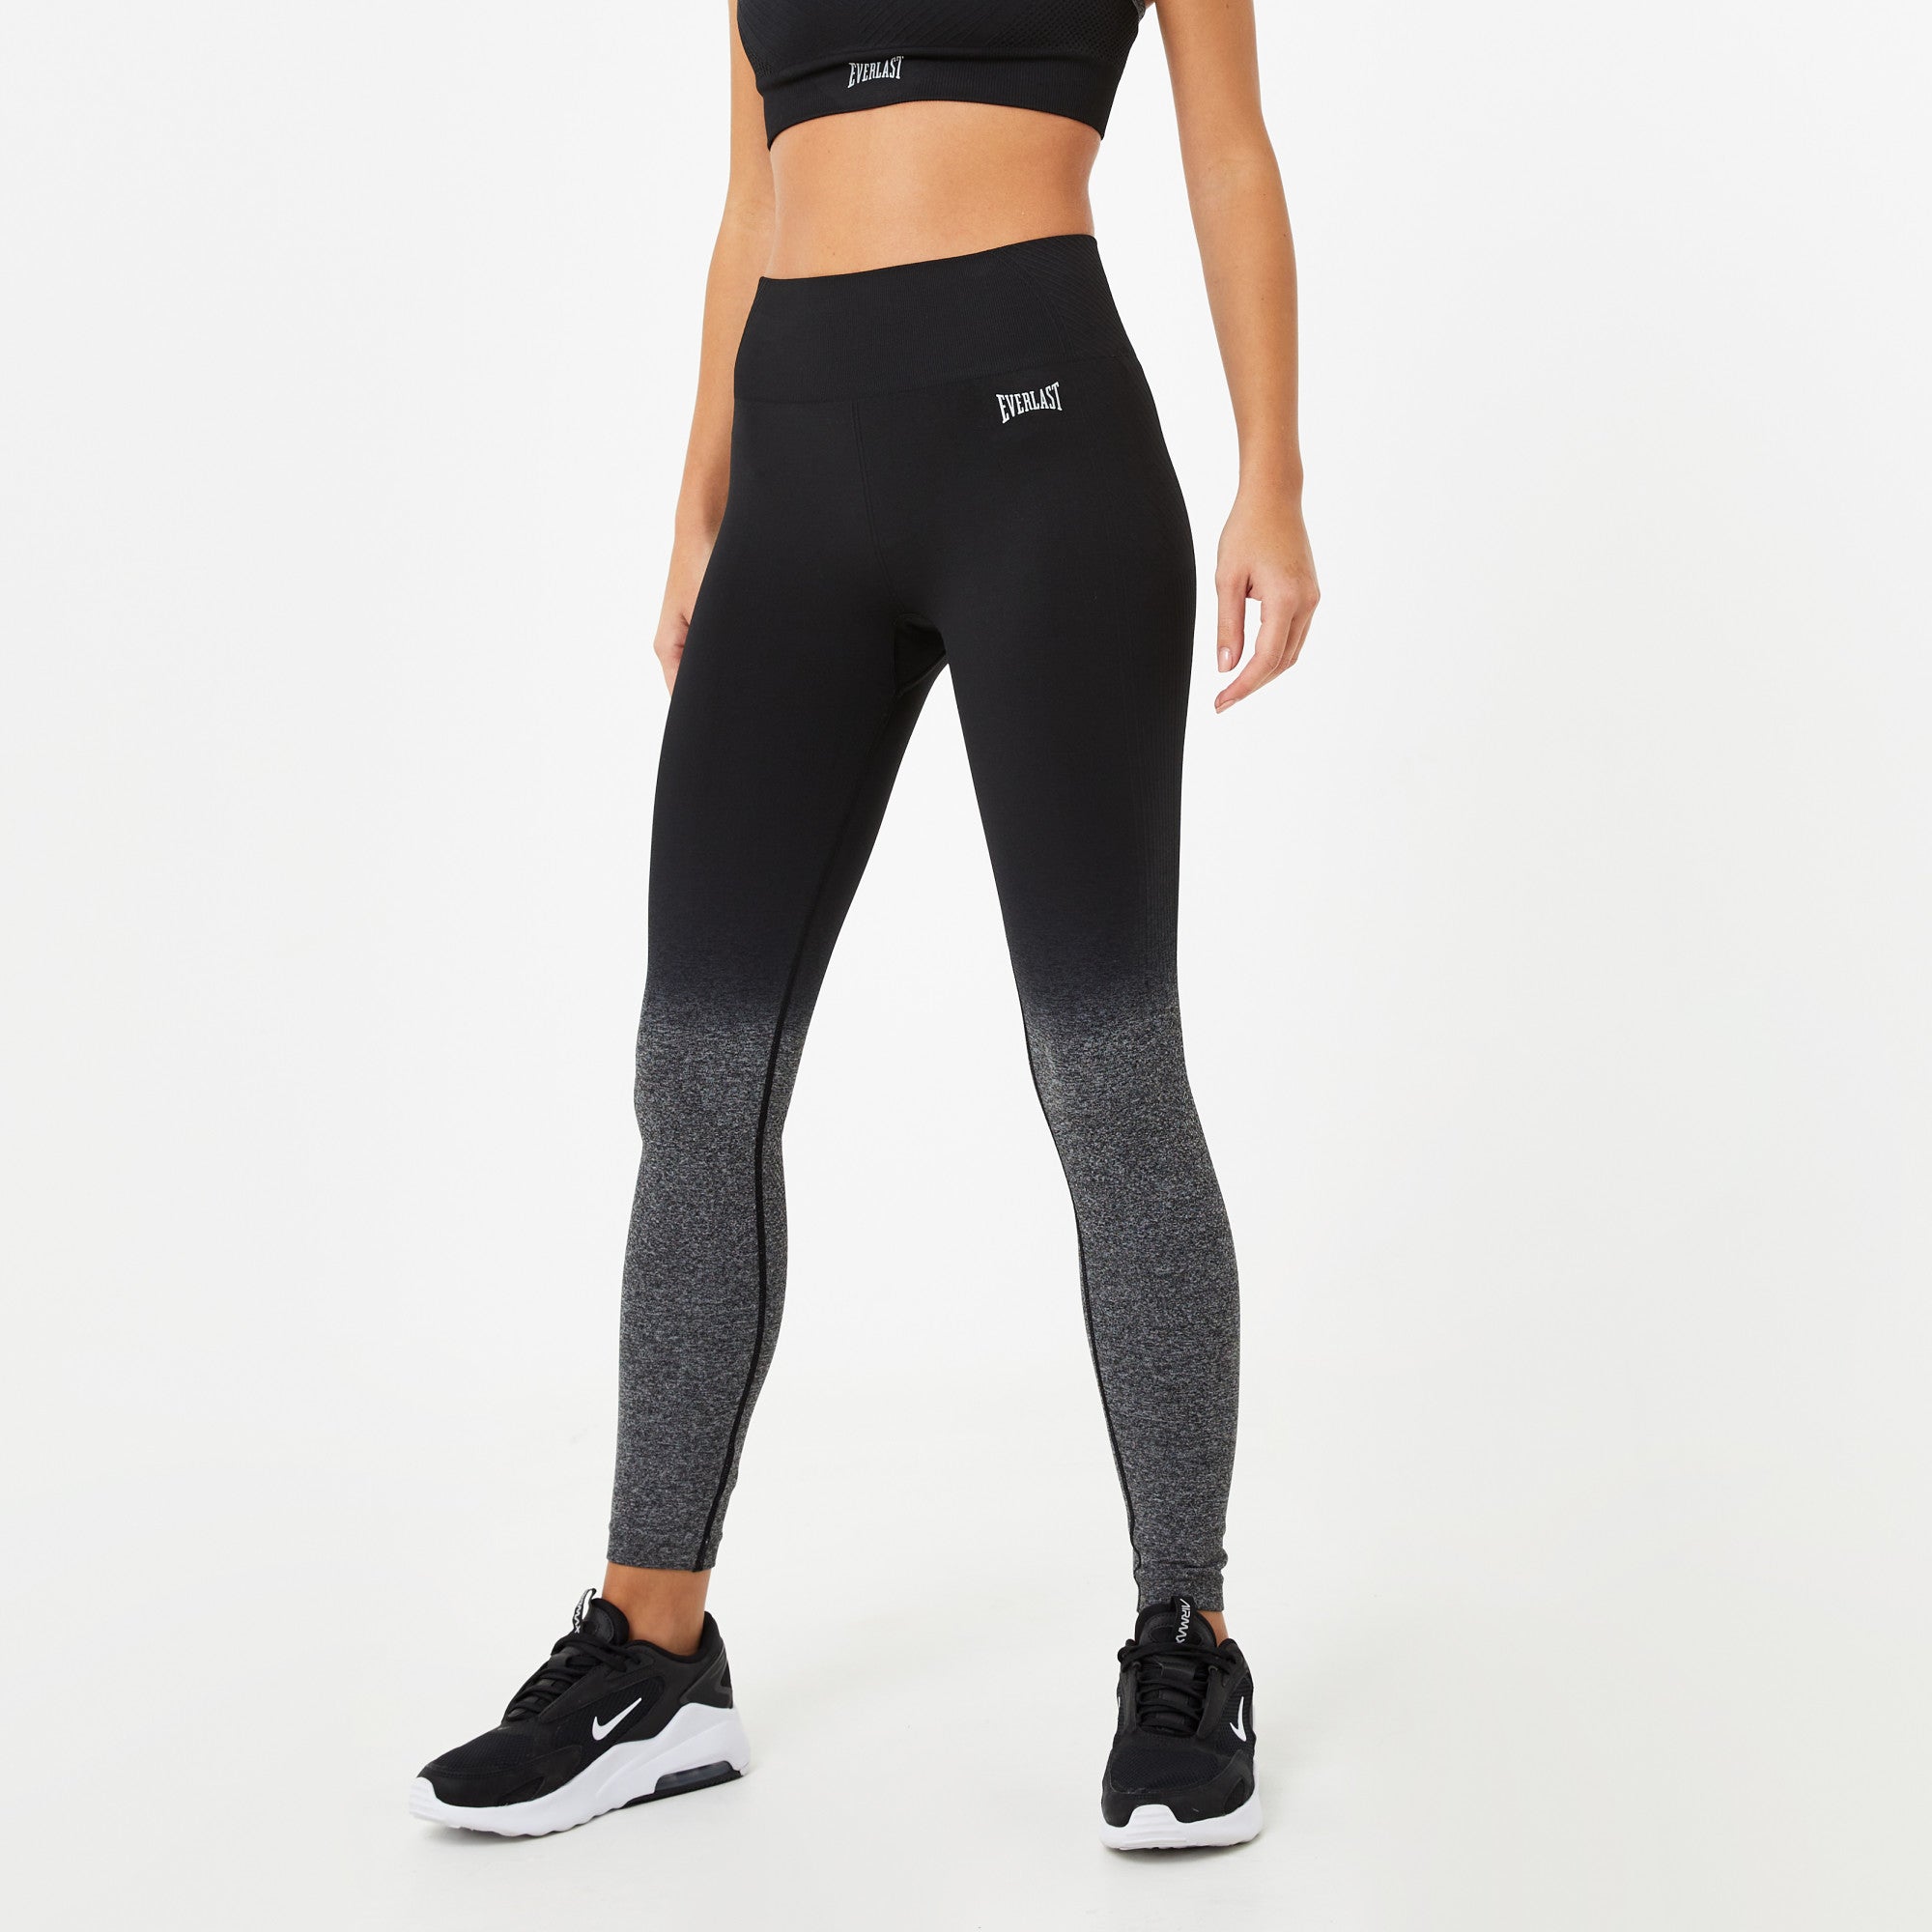 Seamless Softness Ombre Hollow Out Sports Leggings